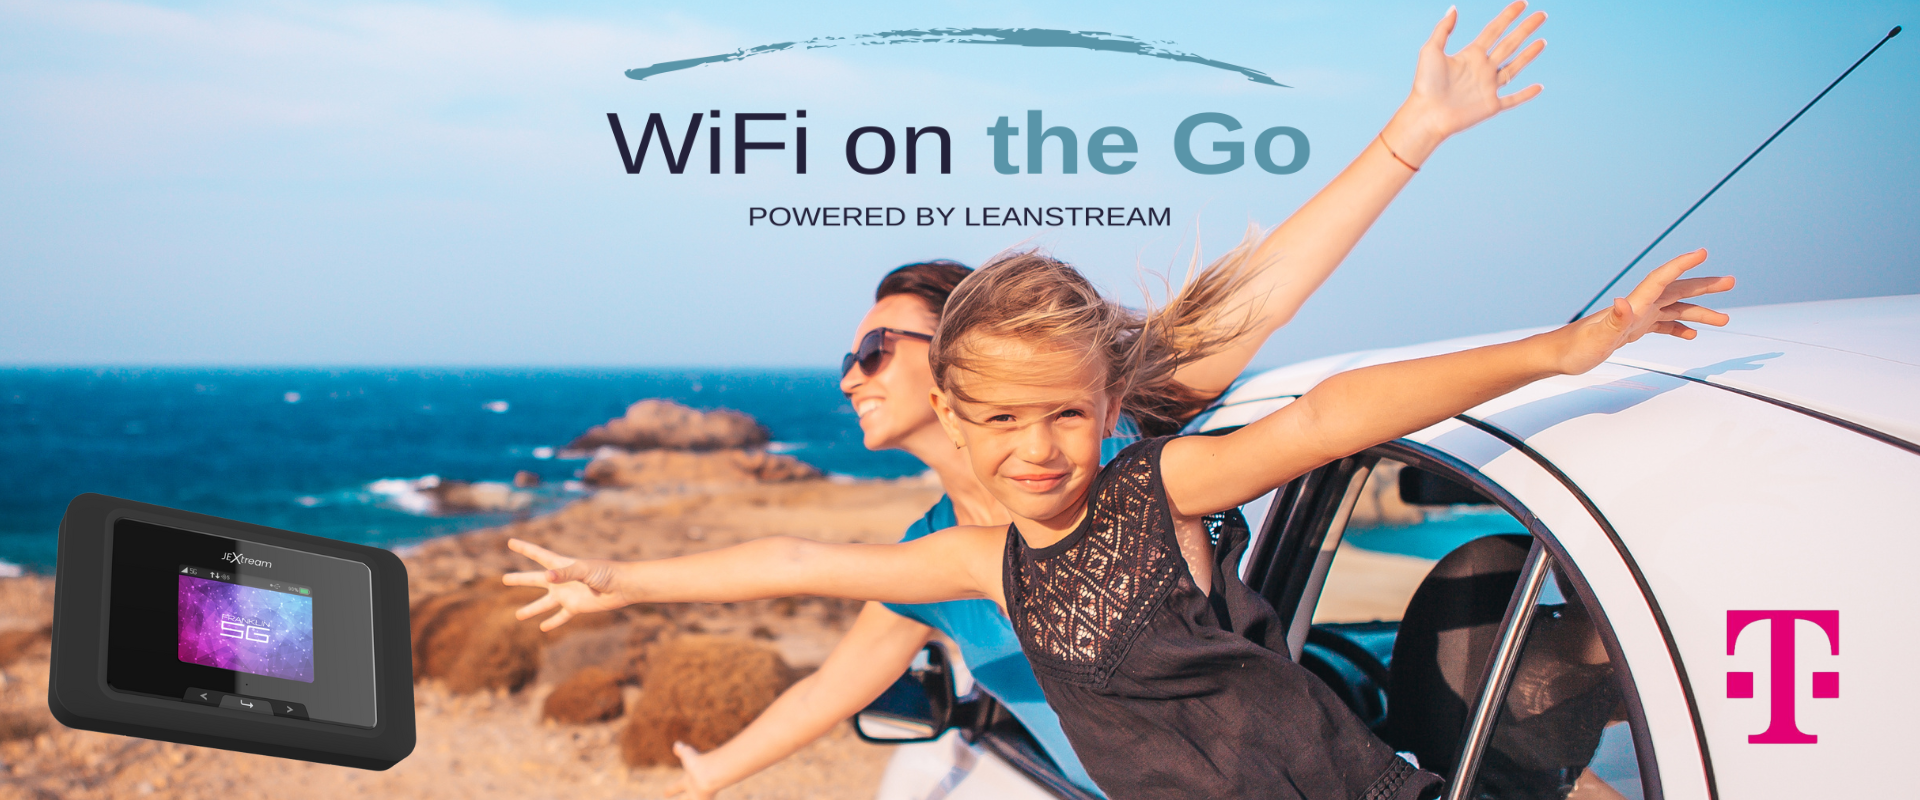 2024-0514 Wifi on the Go - Hero Banner A (1920 x 800 px)